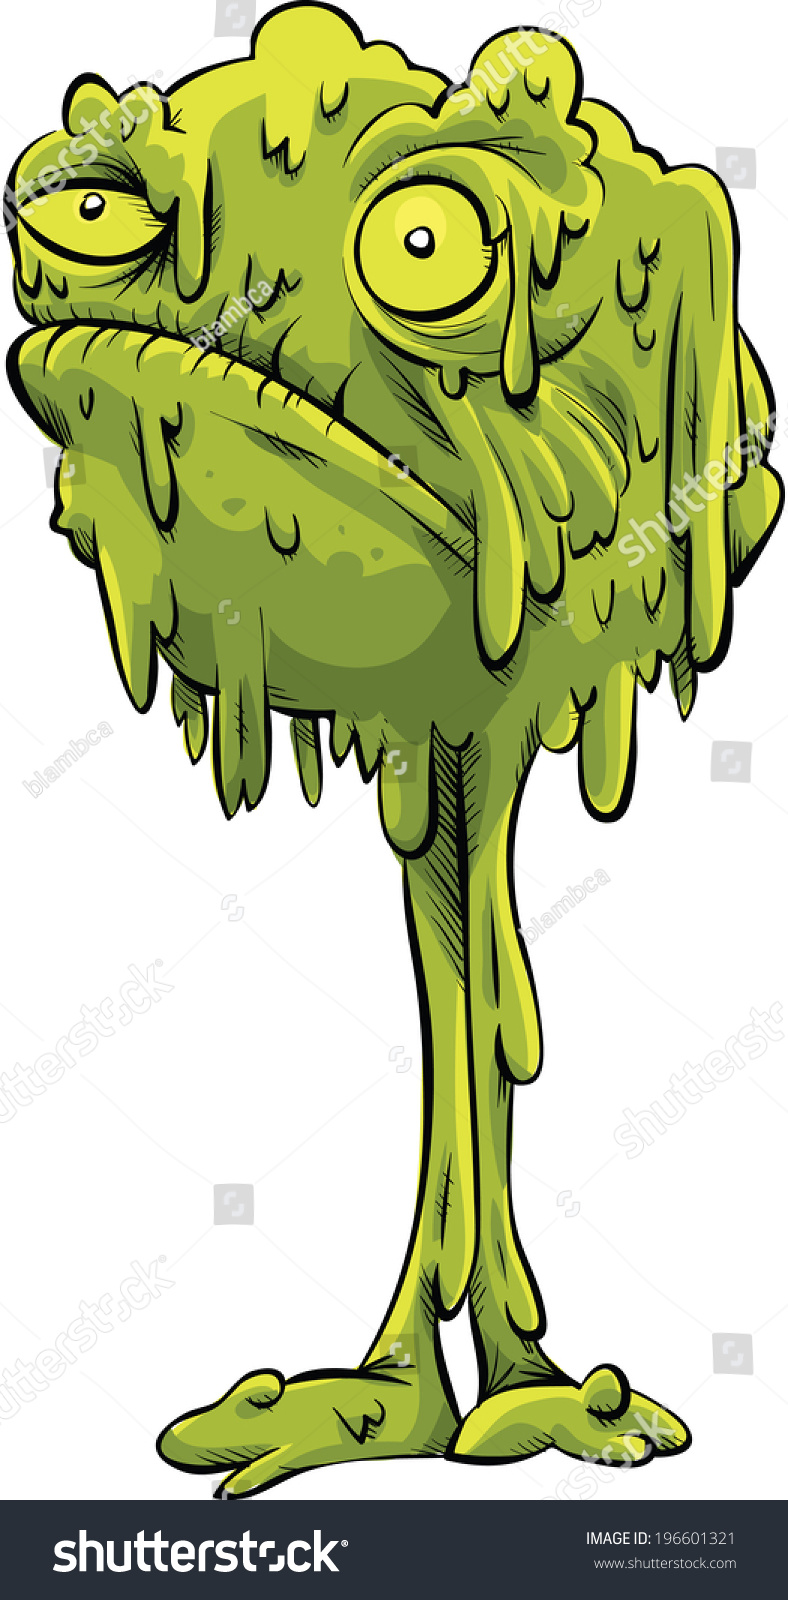 A Cartoon Monster Ball Of Snot Standing On Two Legs. Stock Vector ...